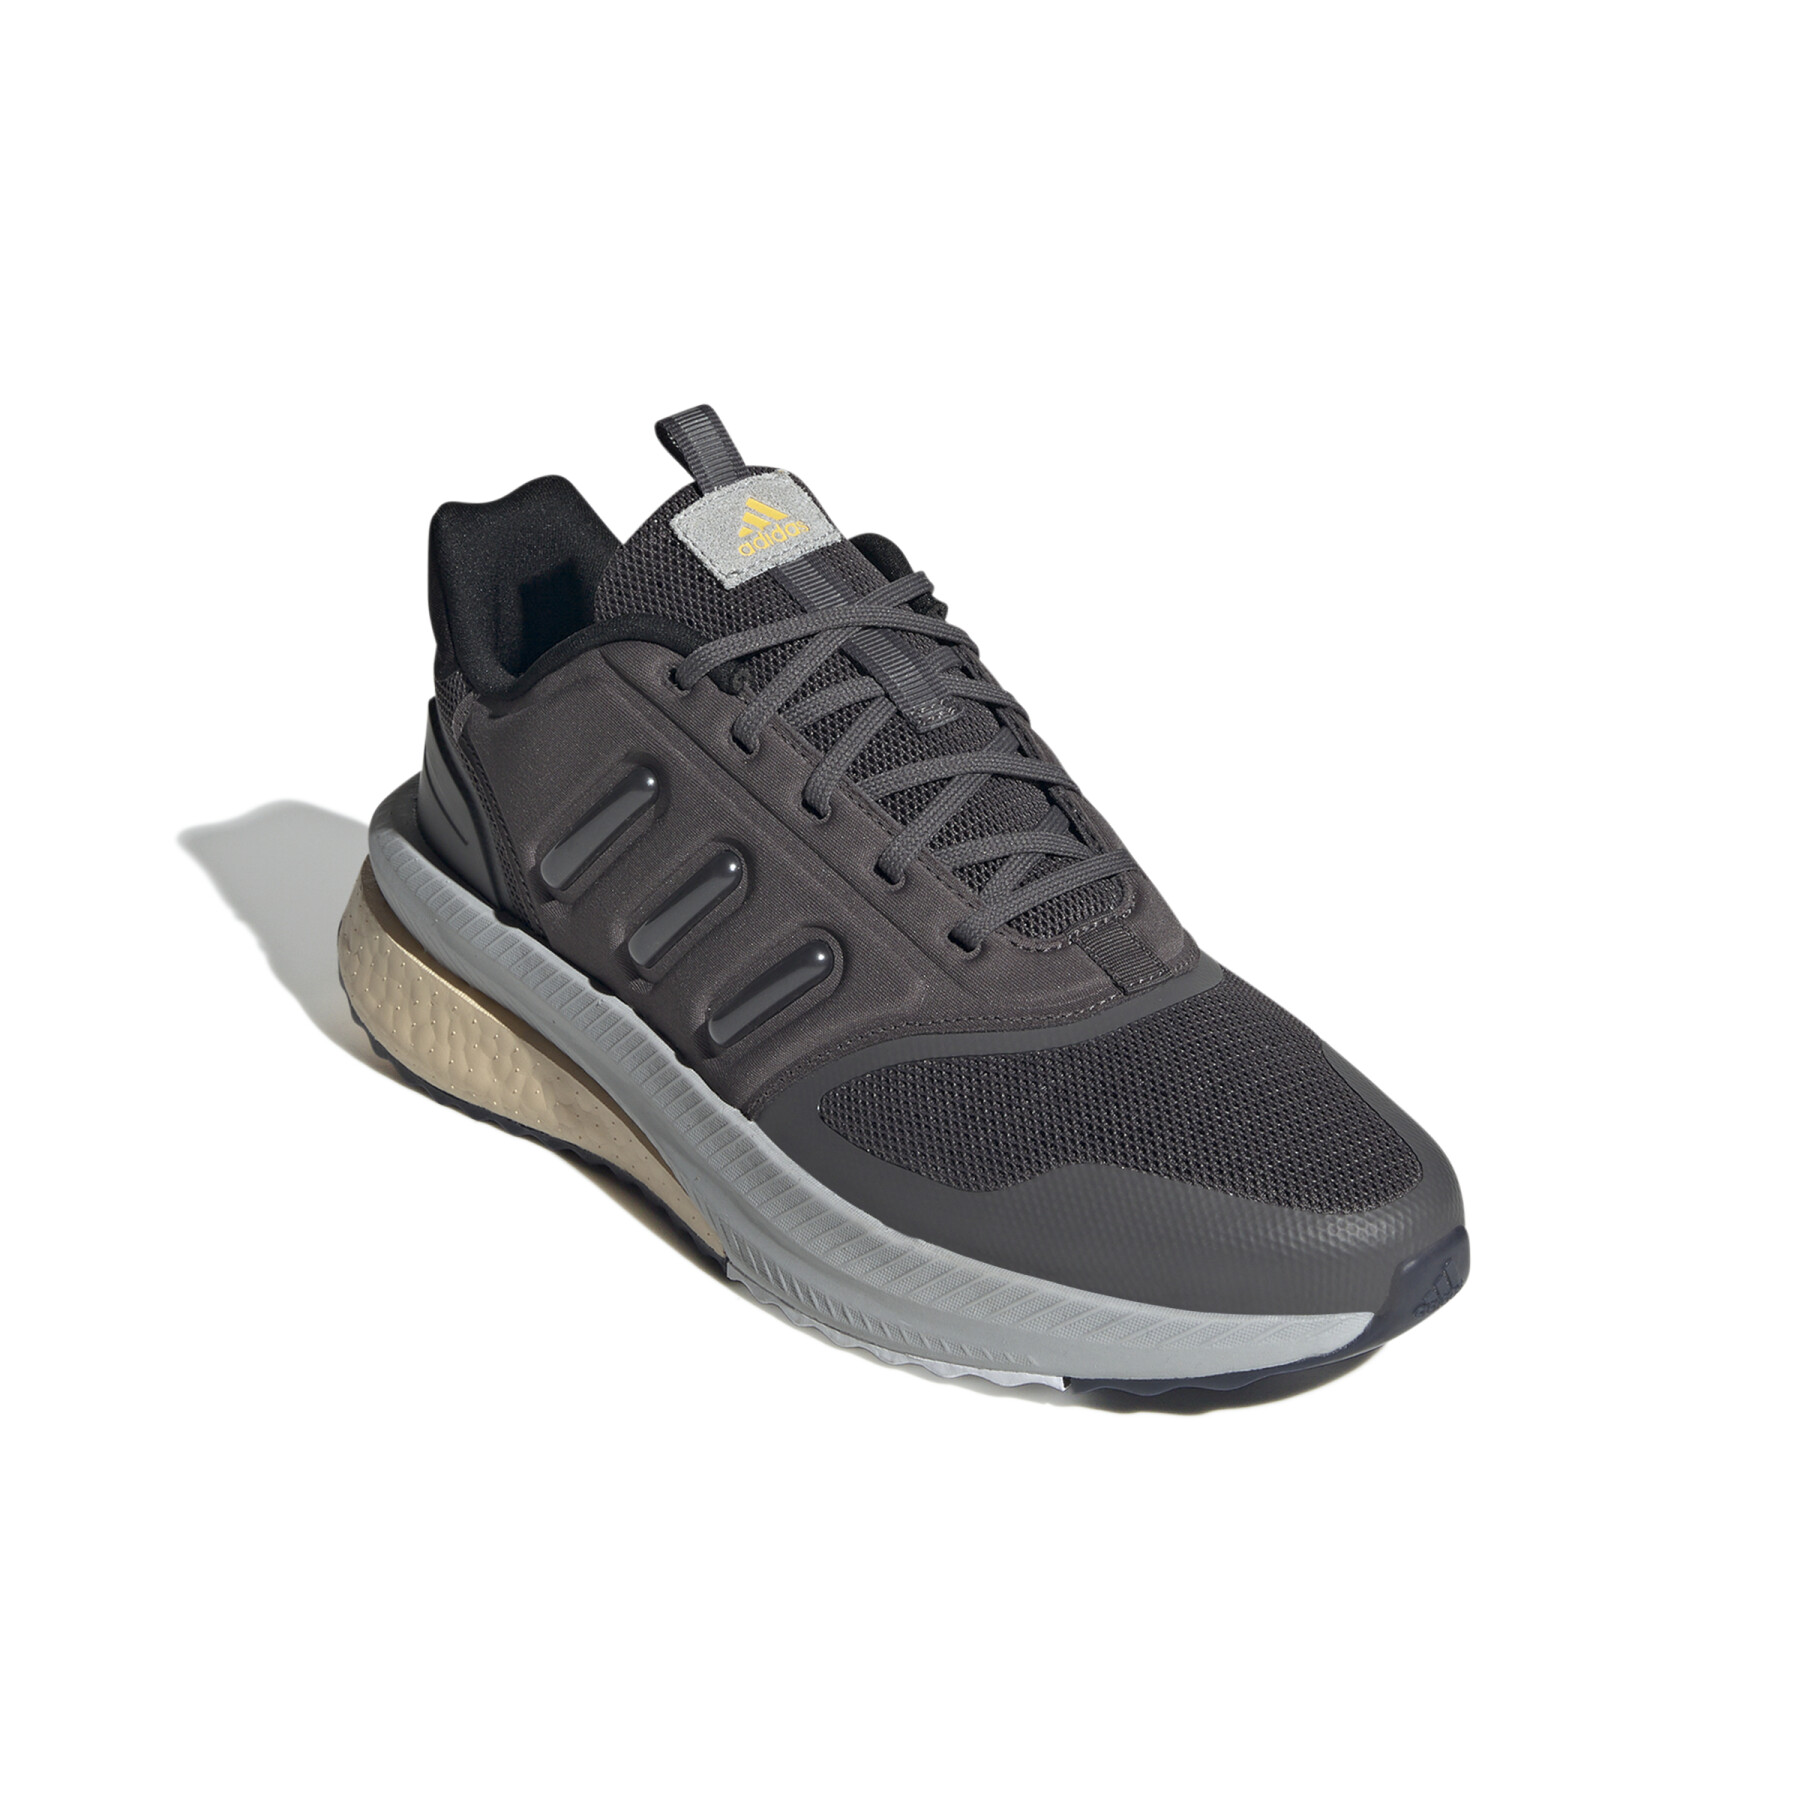 Sneakers adidas X_PLR Phase